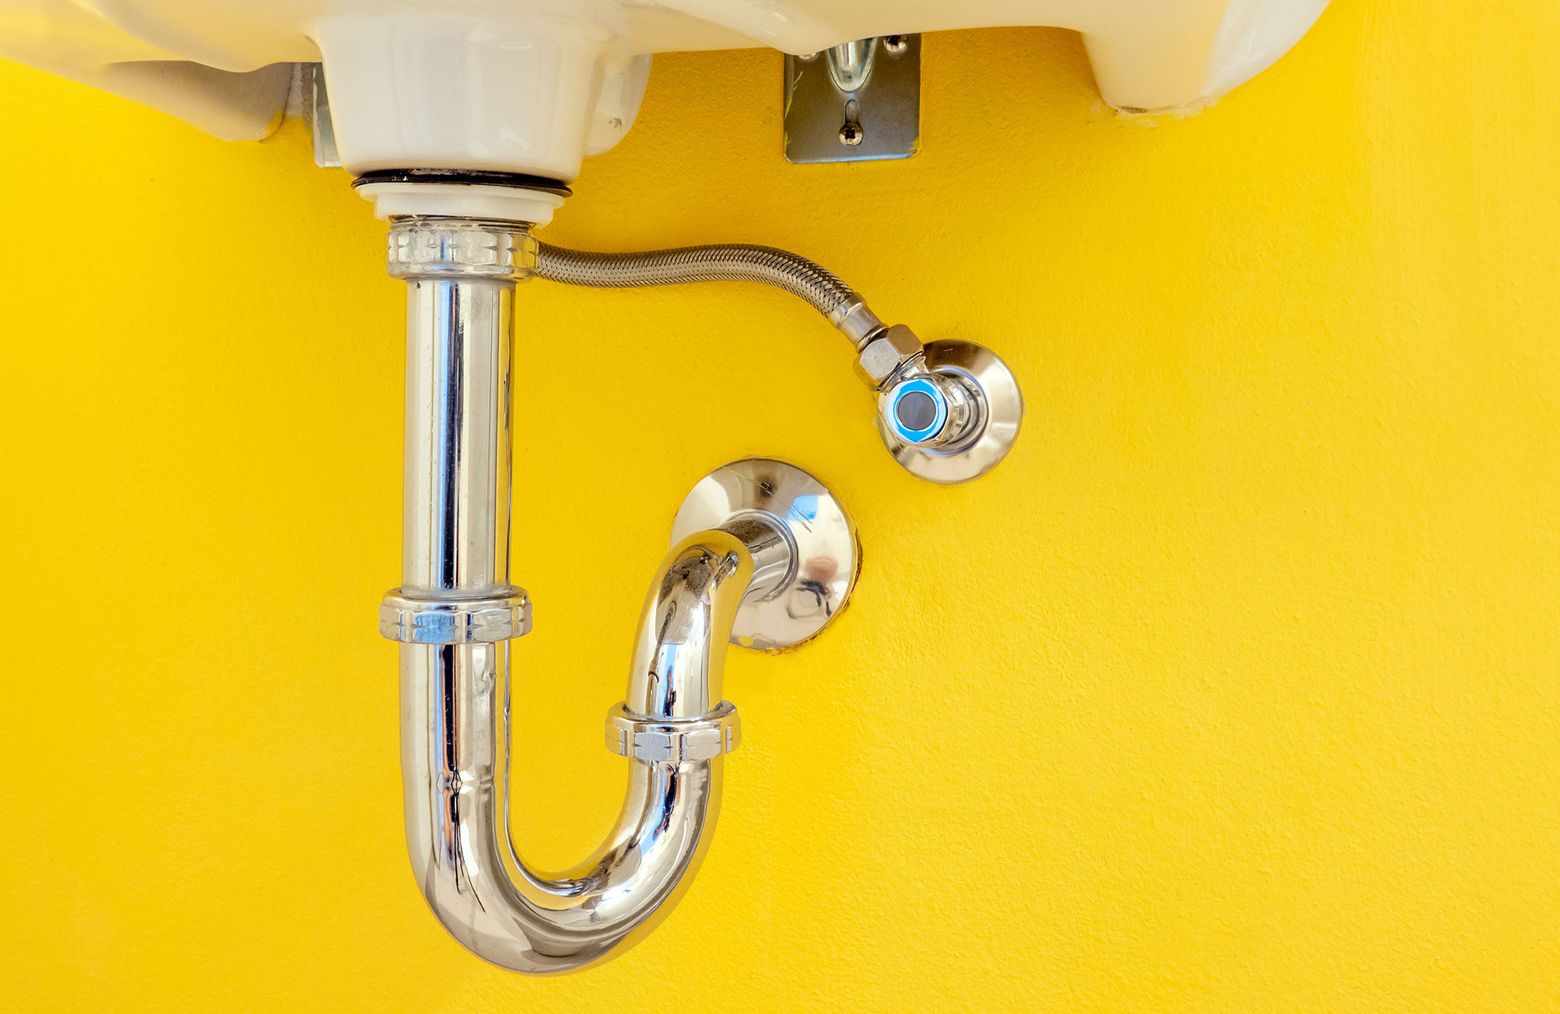 How to Maintain Healthy Plumbing